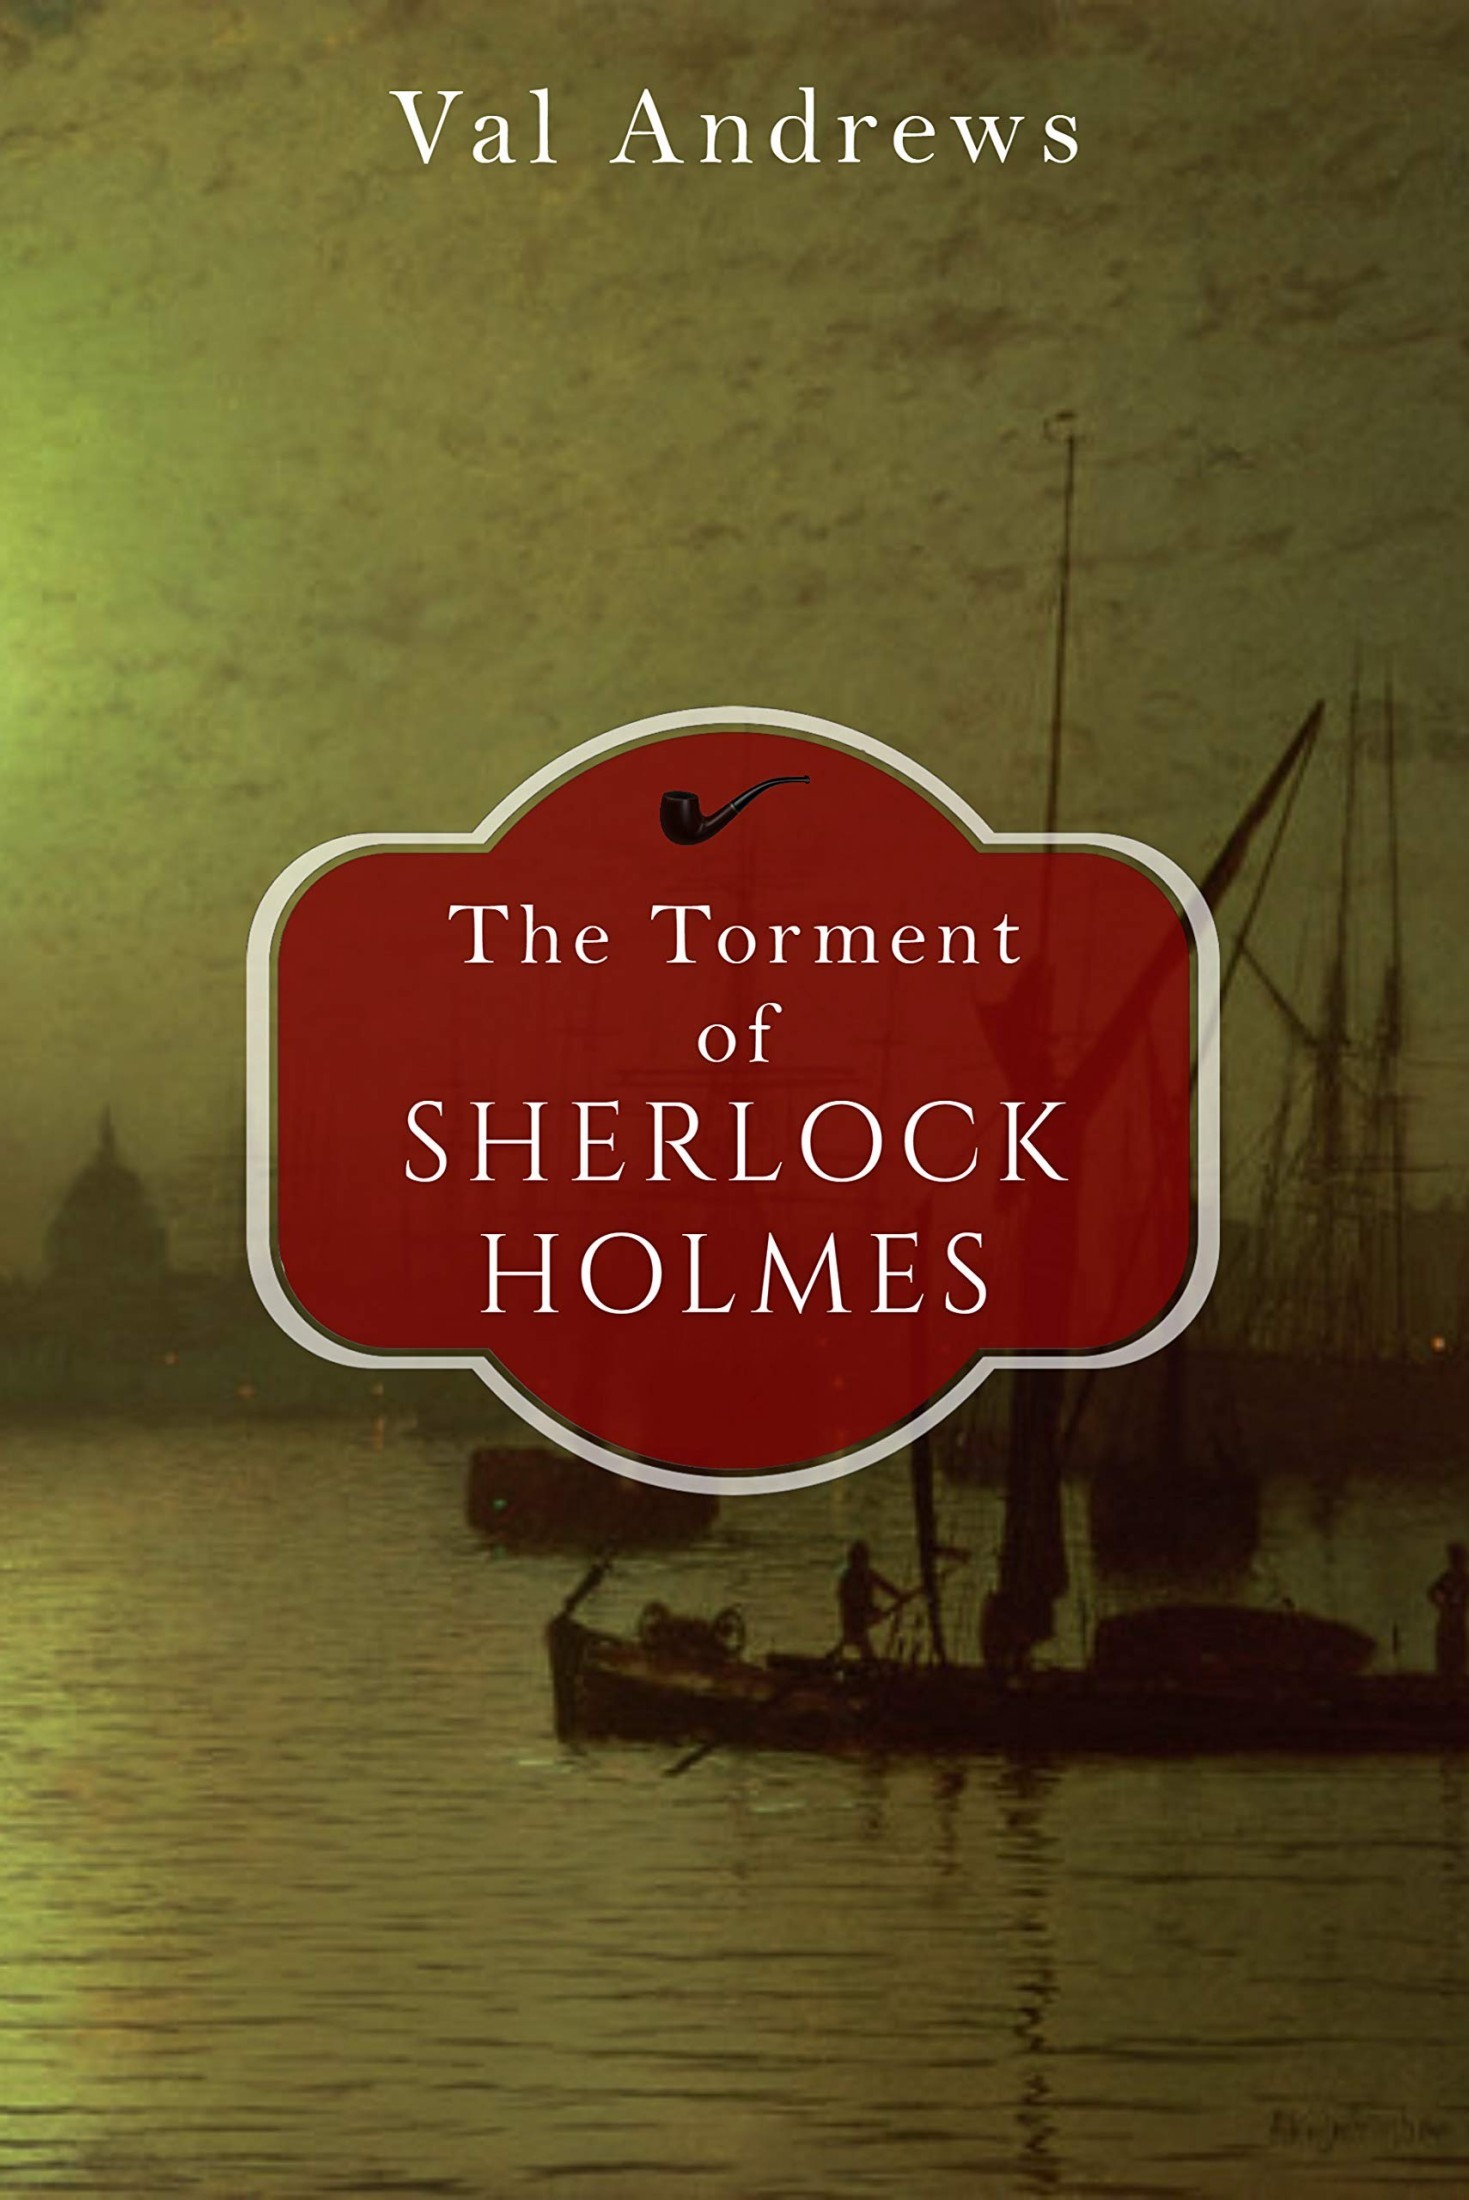 The Torment of Sherlock Holmes